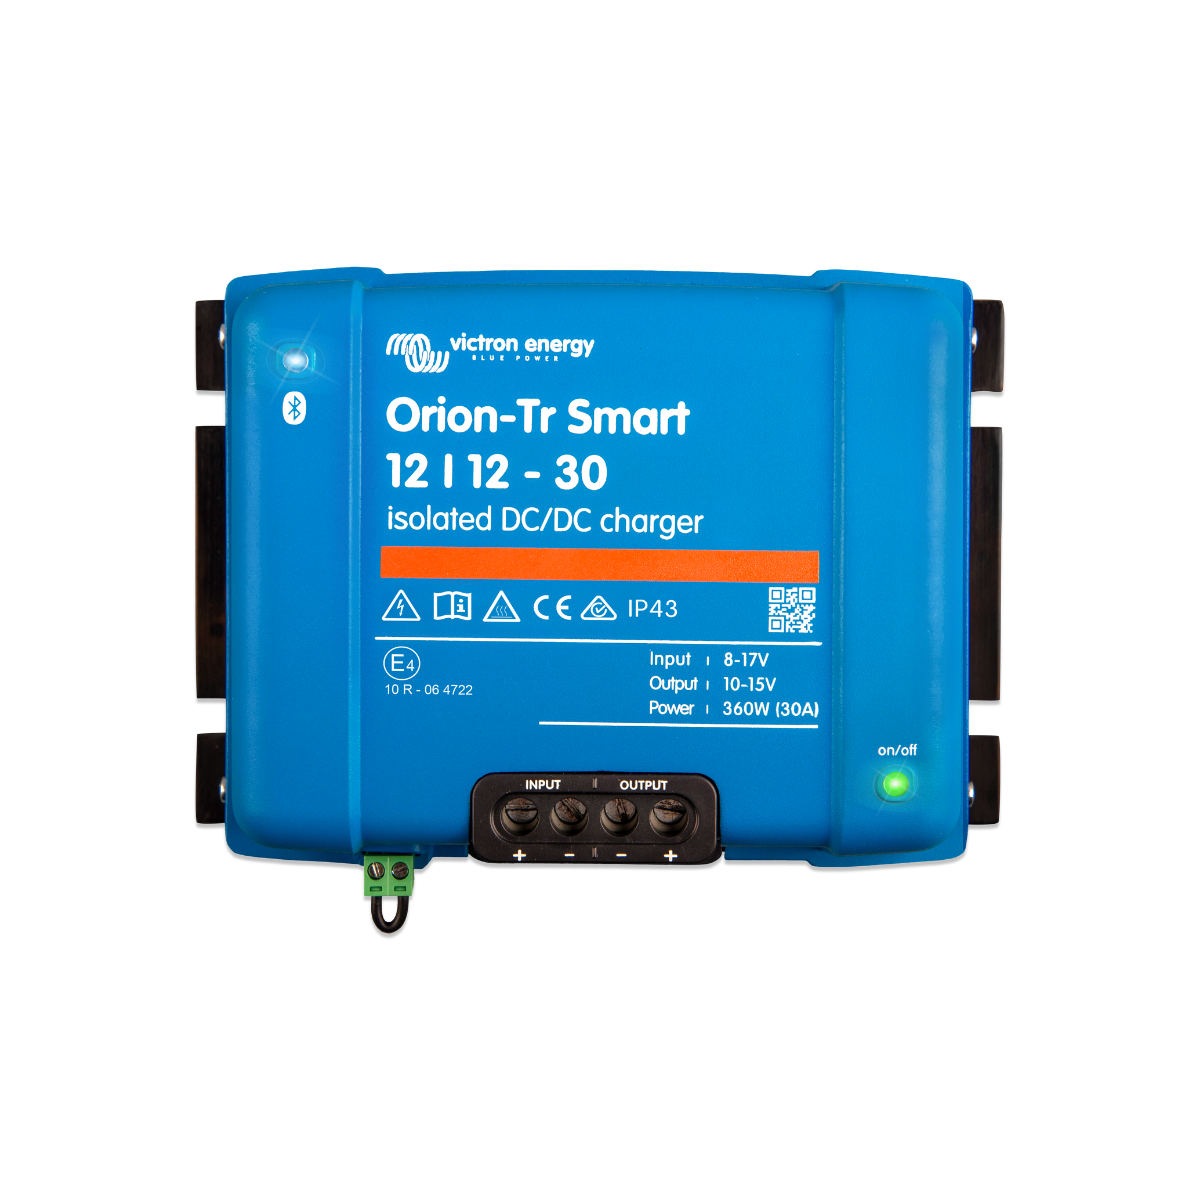 Orion-Tr Smart 12/12-18A - Isolated DC-DC Charger